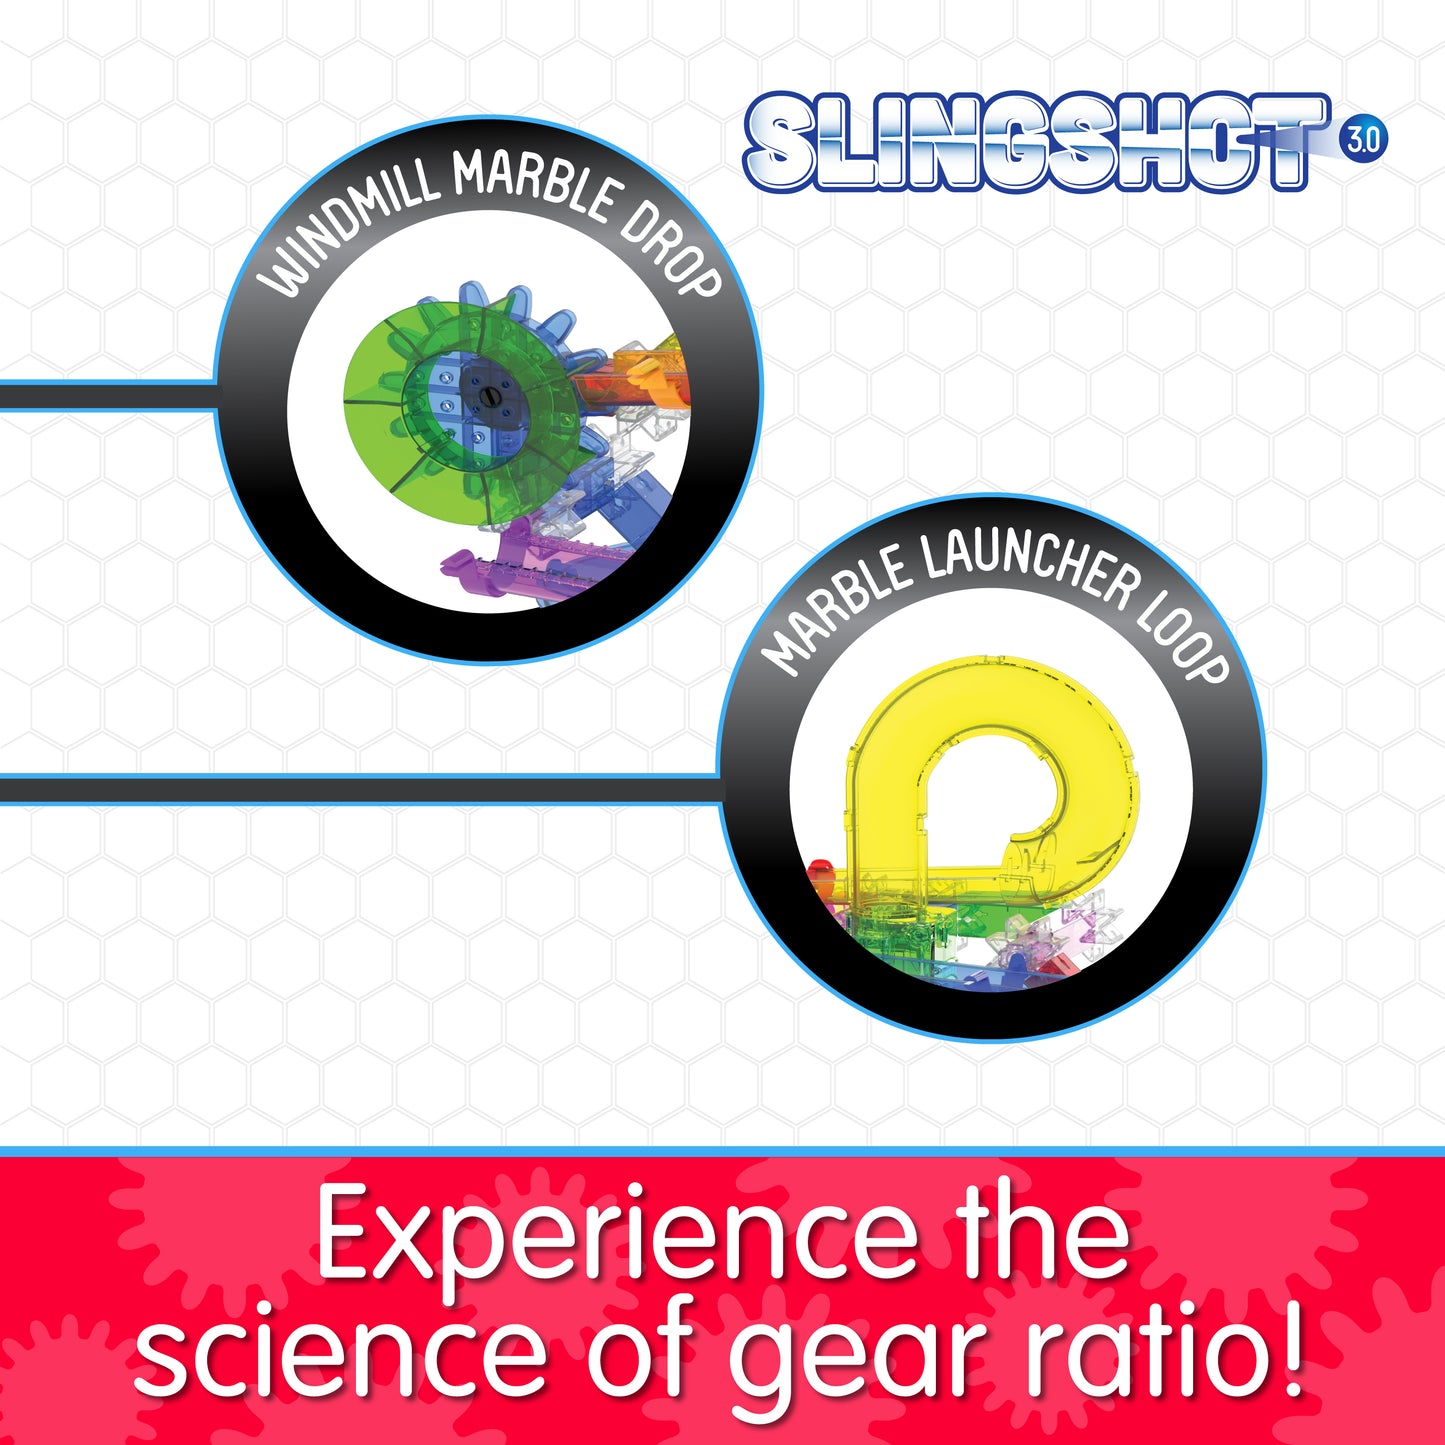 Infographic about Slingshot 3.0's features that says, "Experience the science of gear ratio!"